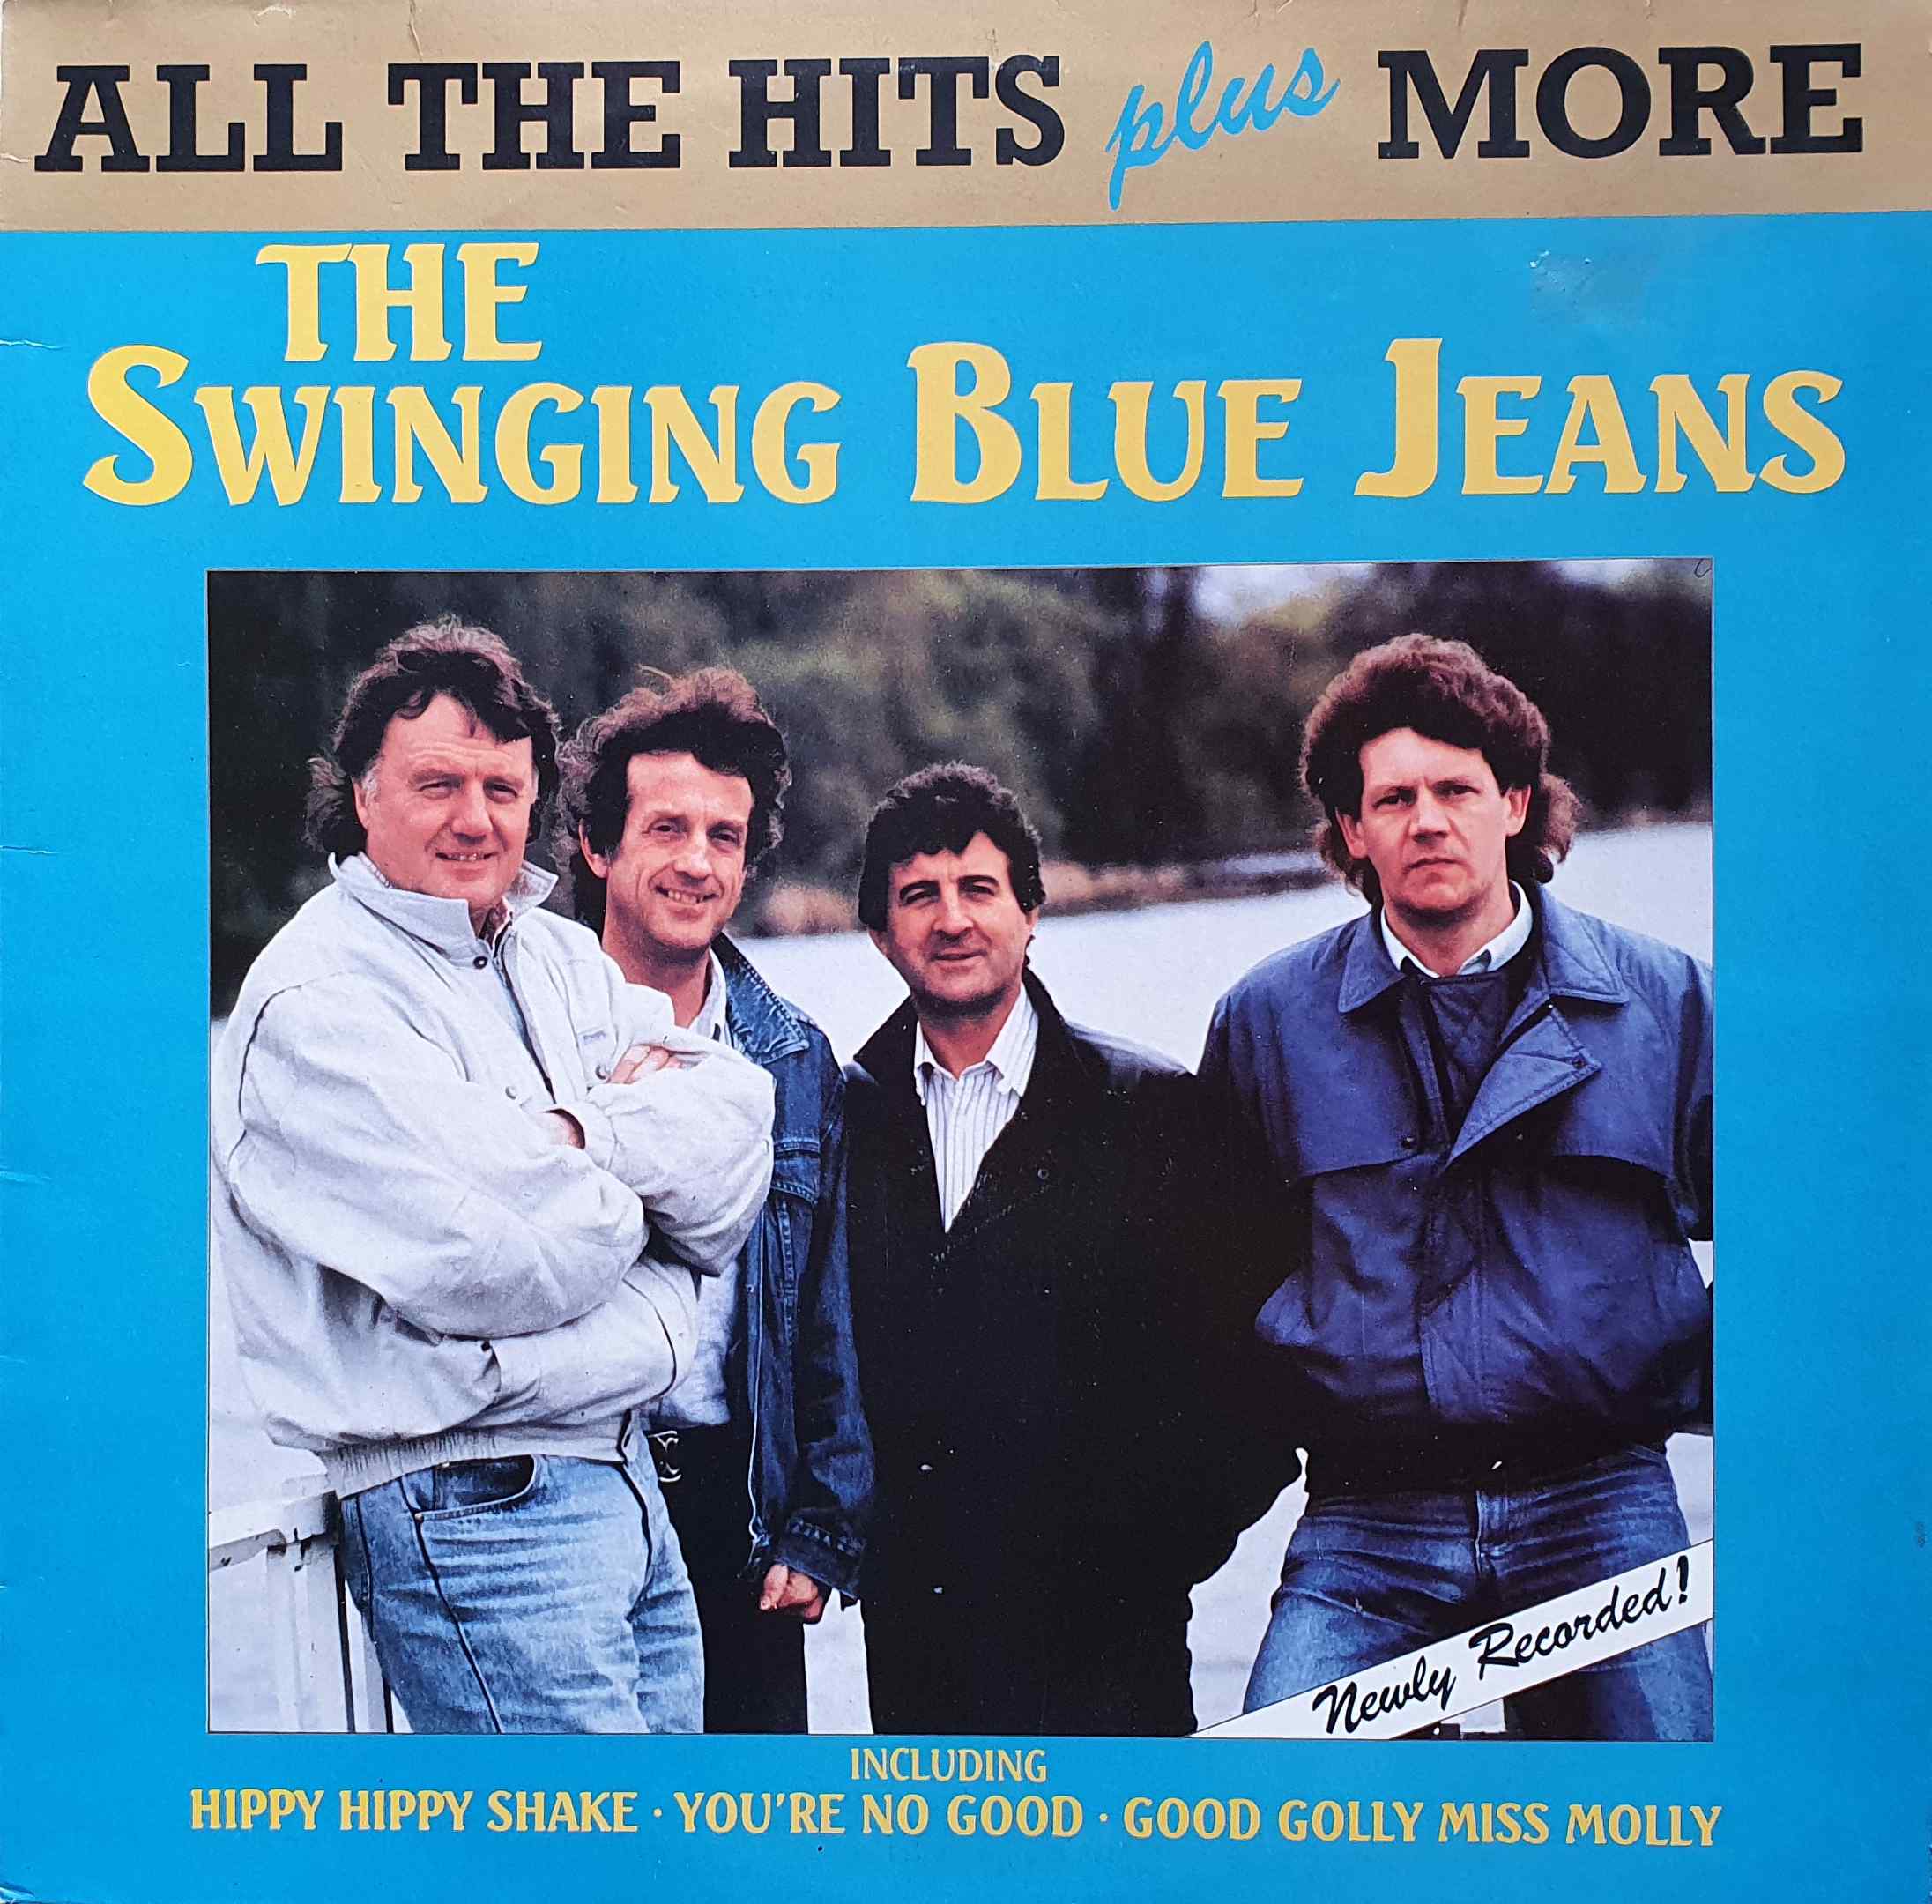 Picture of PRST 003 All the hits plus more by artist Swinging Blue Jeans from the BBC albums - Records and Tapes library